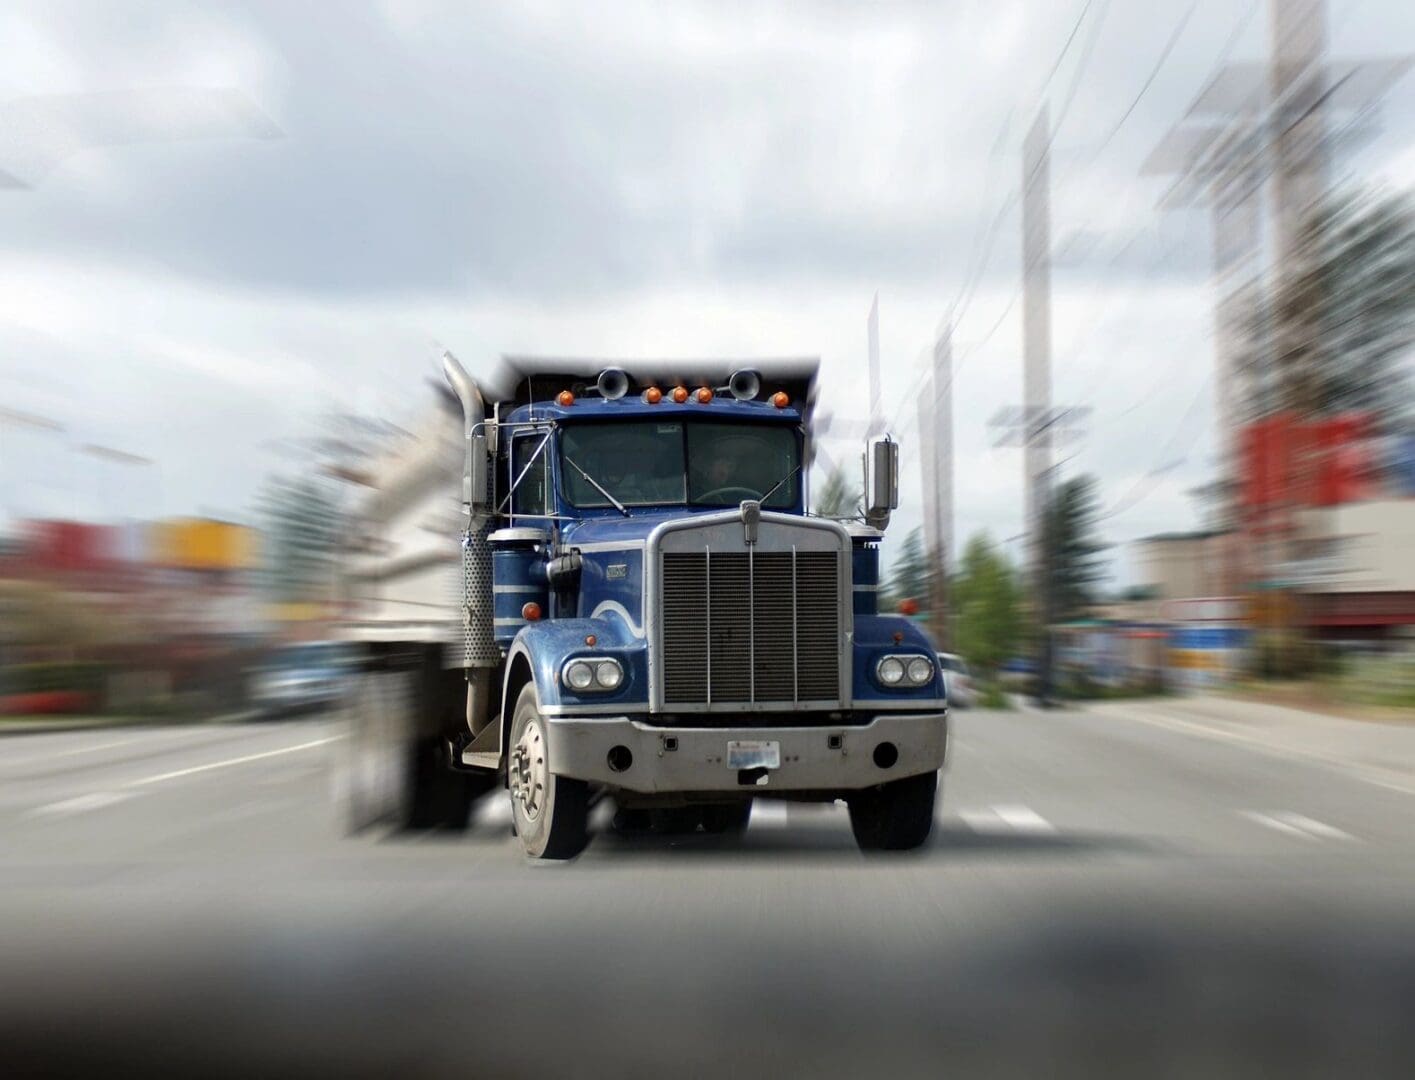 A truck driving down the street with a blurry background.